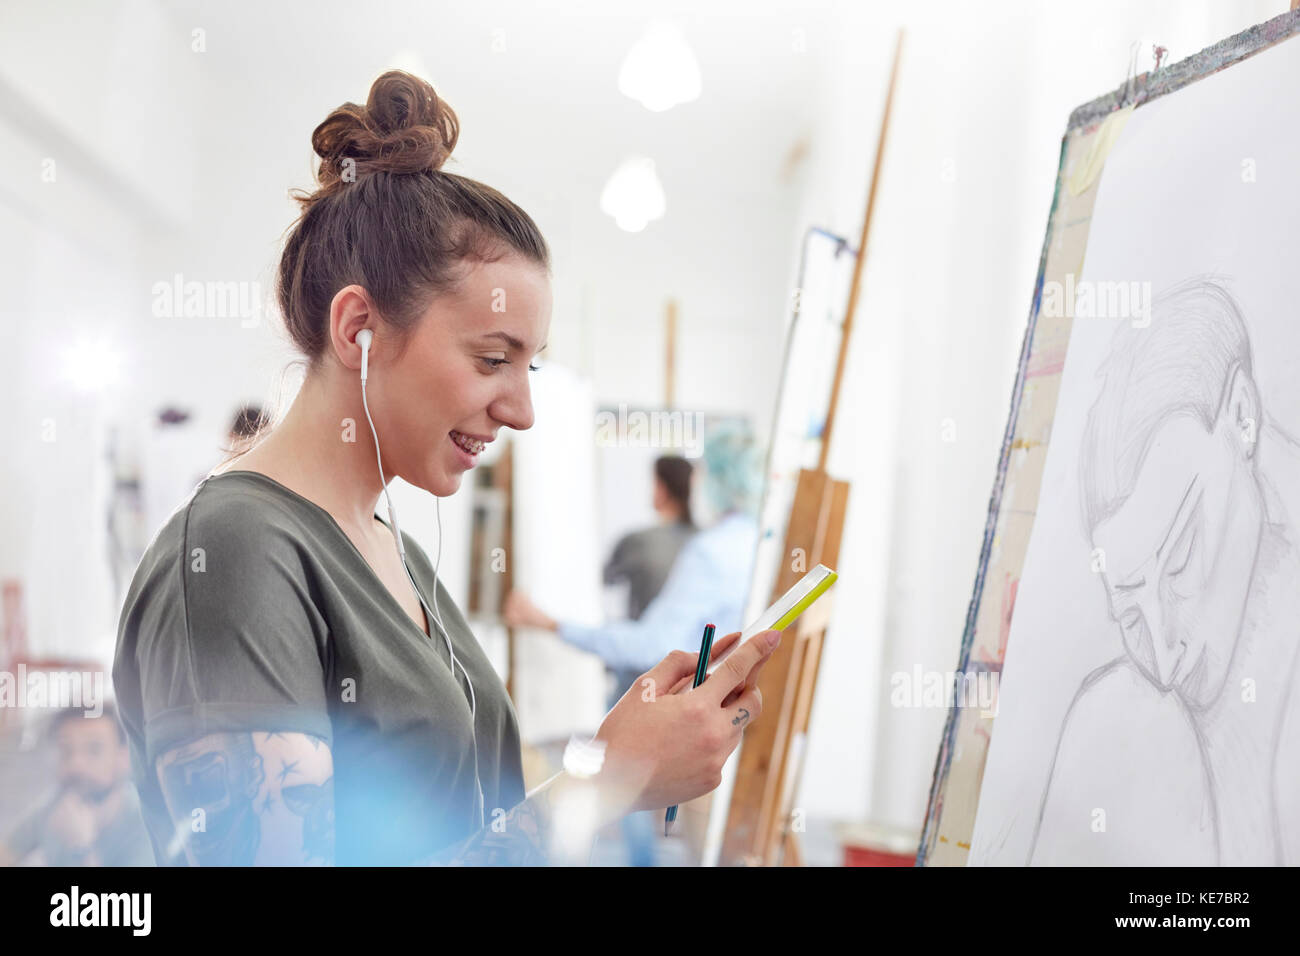 Smiling female artist with headphones listening to music and sketching in art class studio Stock Photo